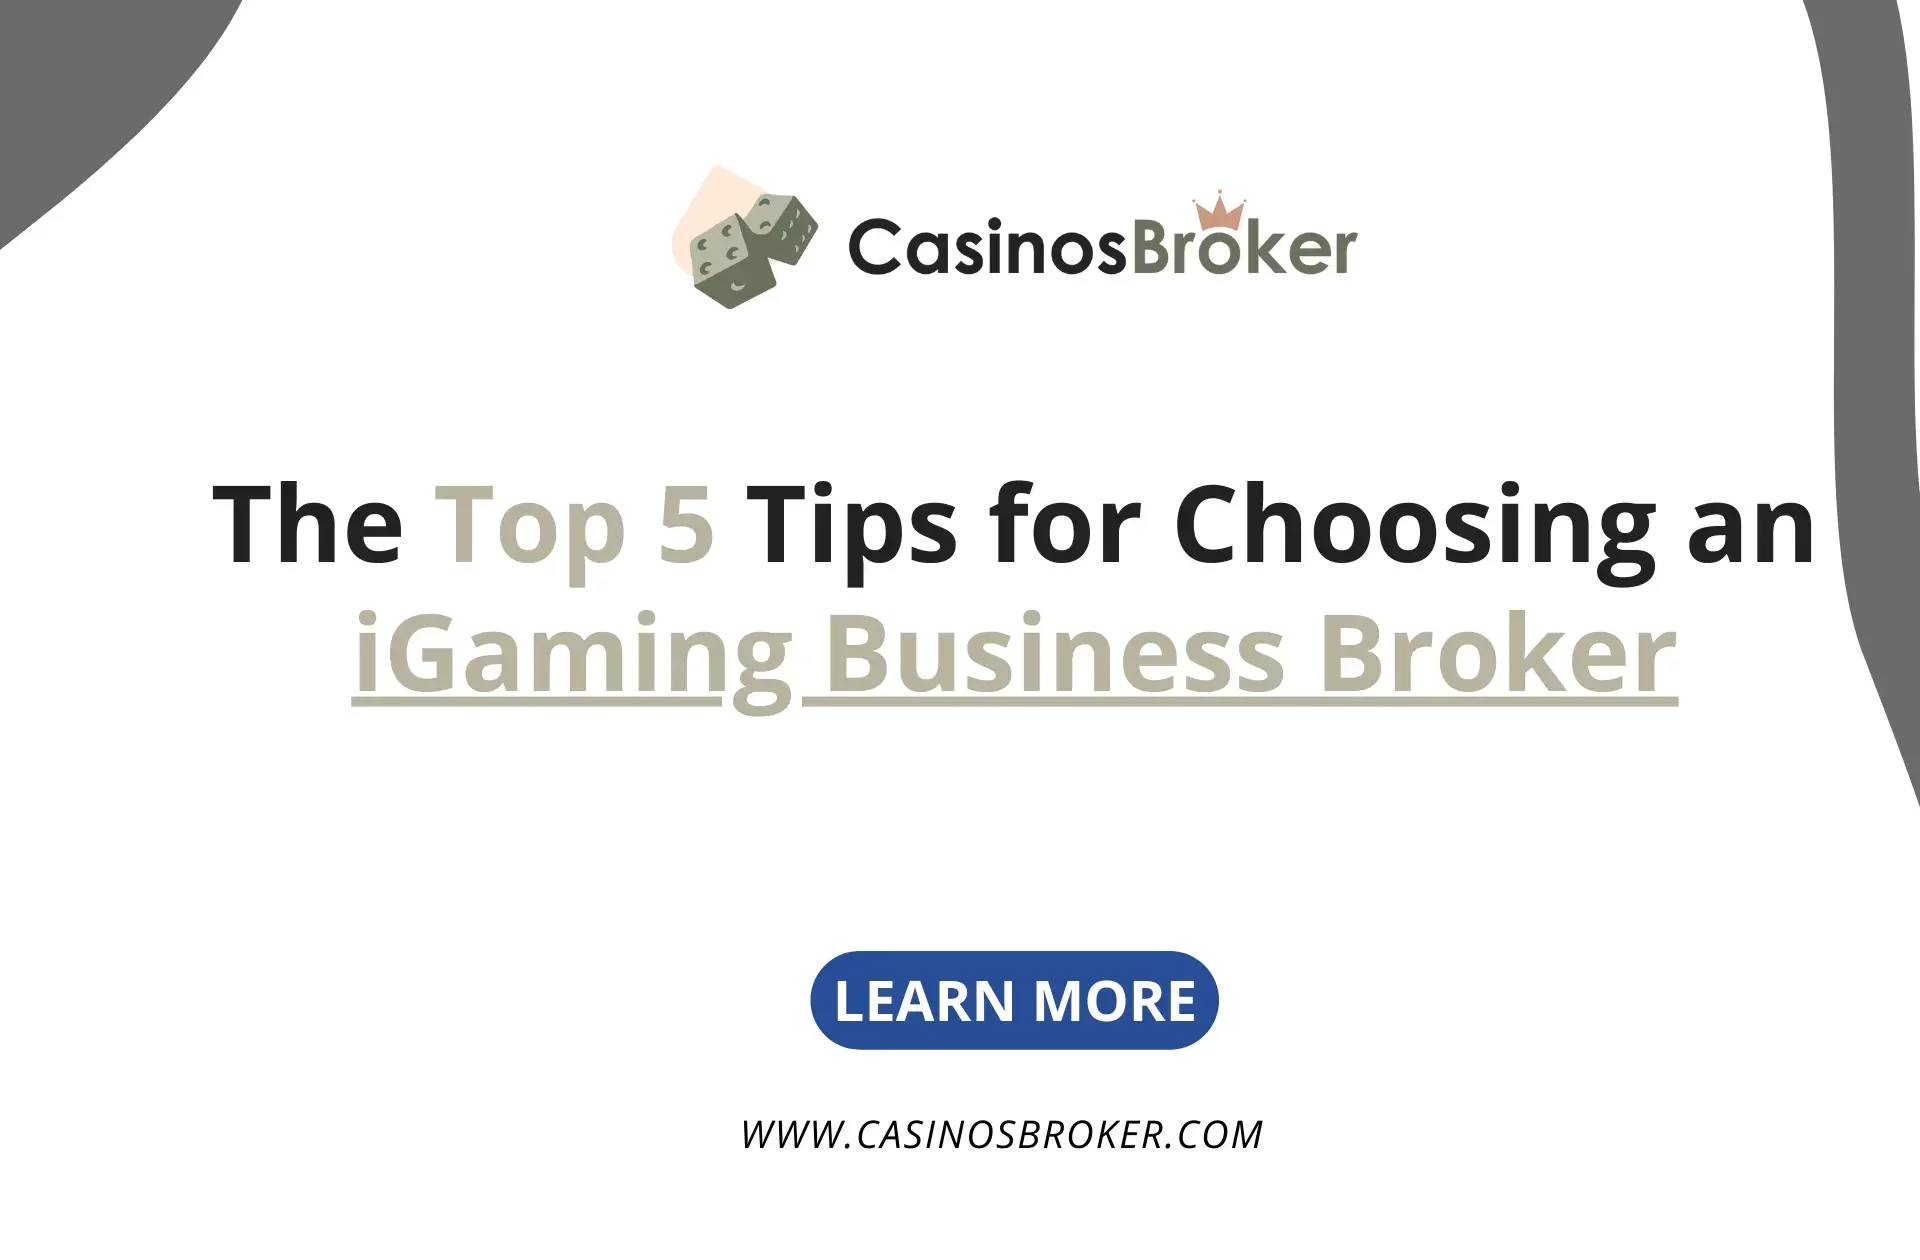 The Top 5 Tips for Choosing an iGaming Business Broker